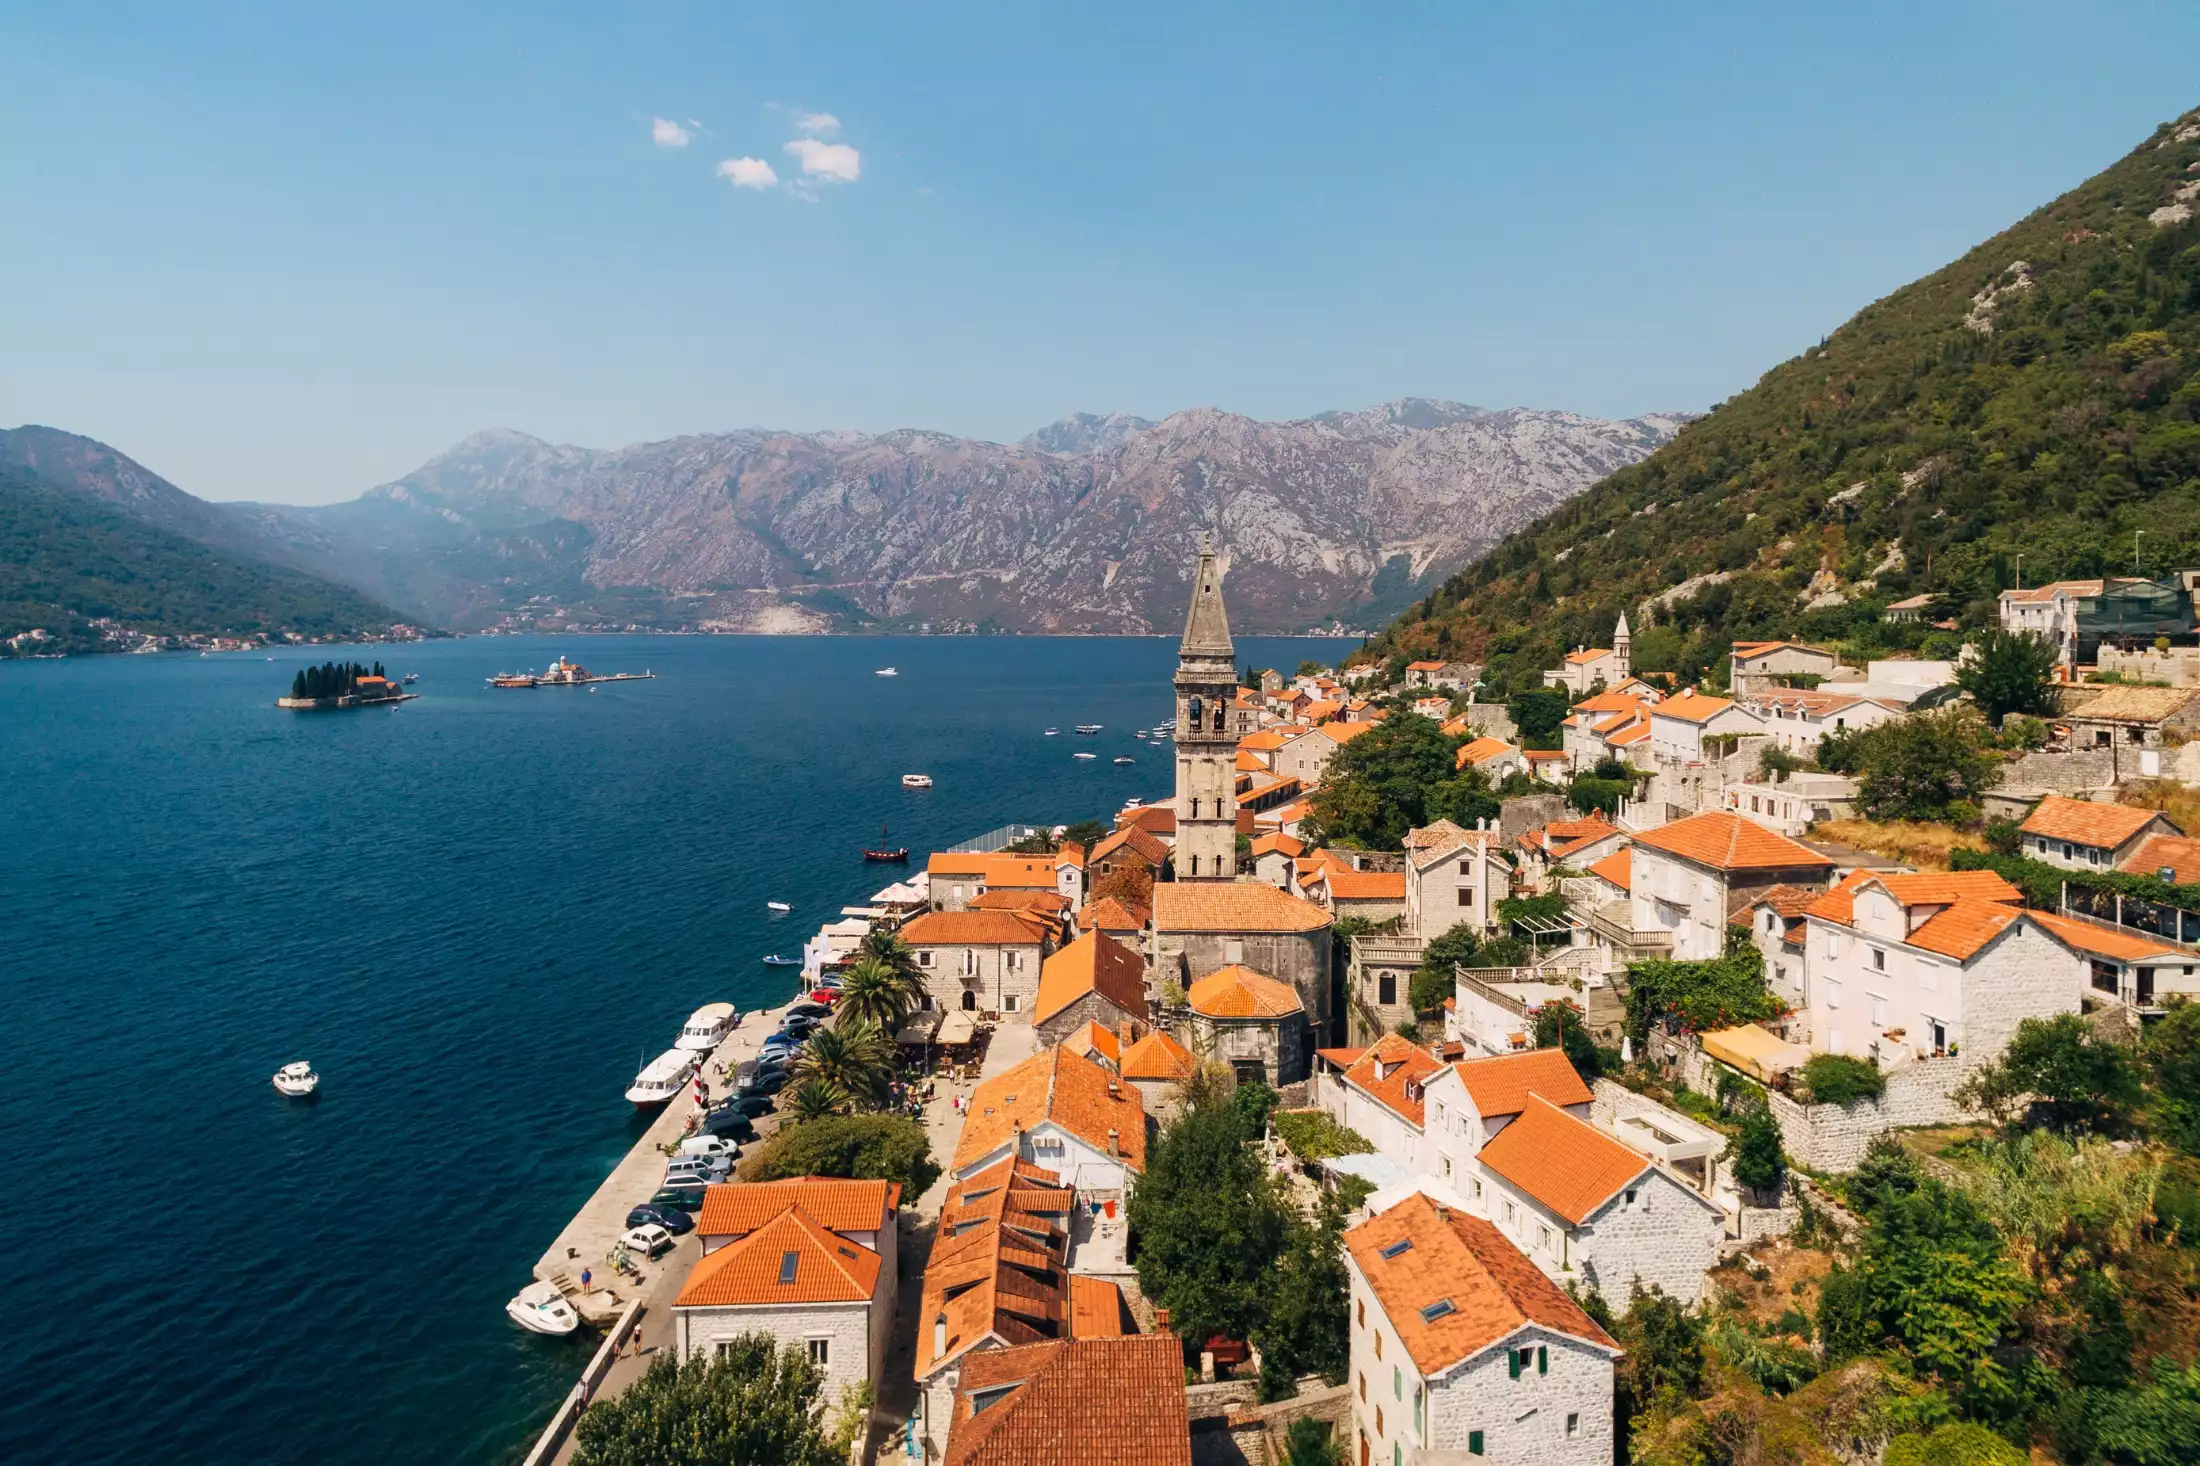 A view of Perast Montenegro from above showing red-roofed stone houses of the old town and the Bay of Kotor in the background.